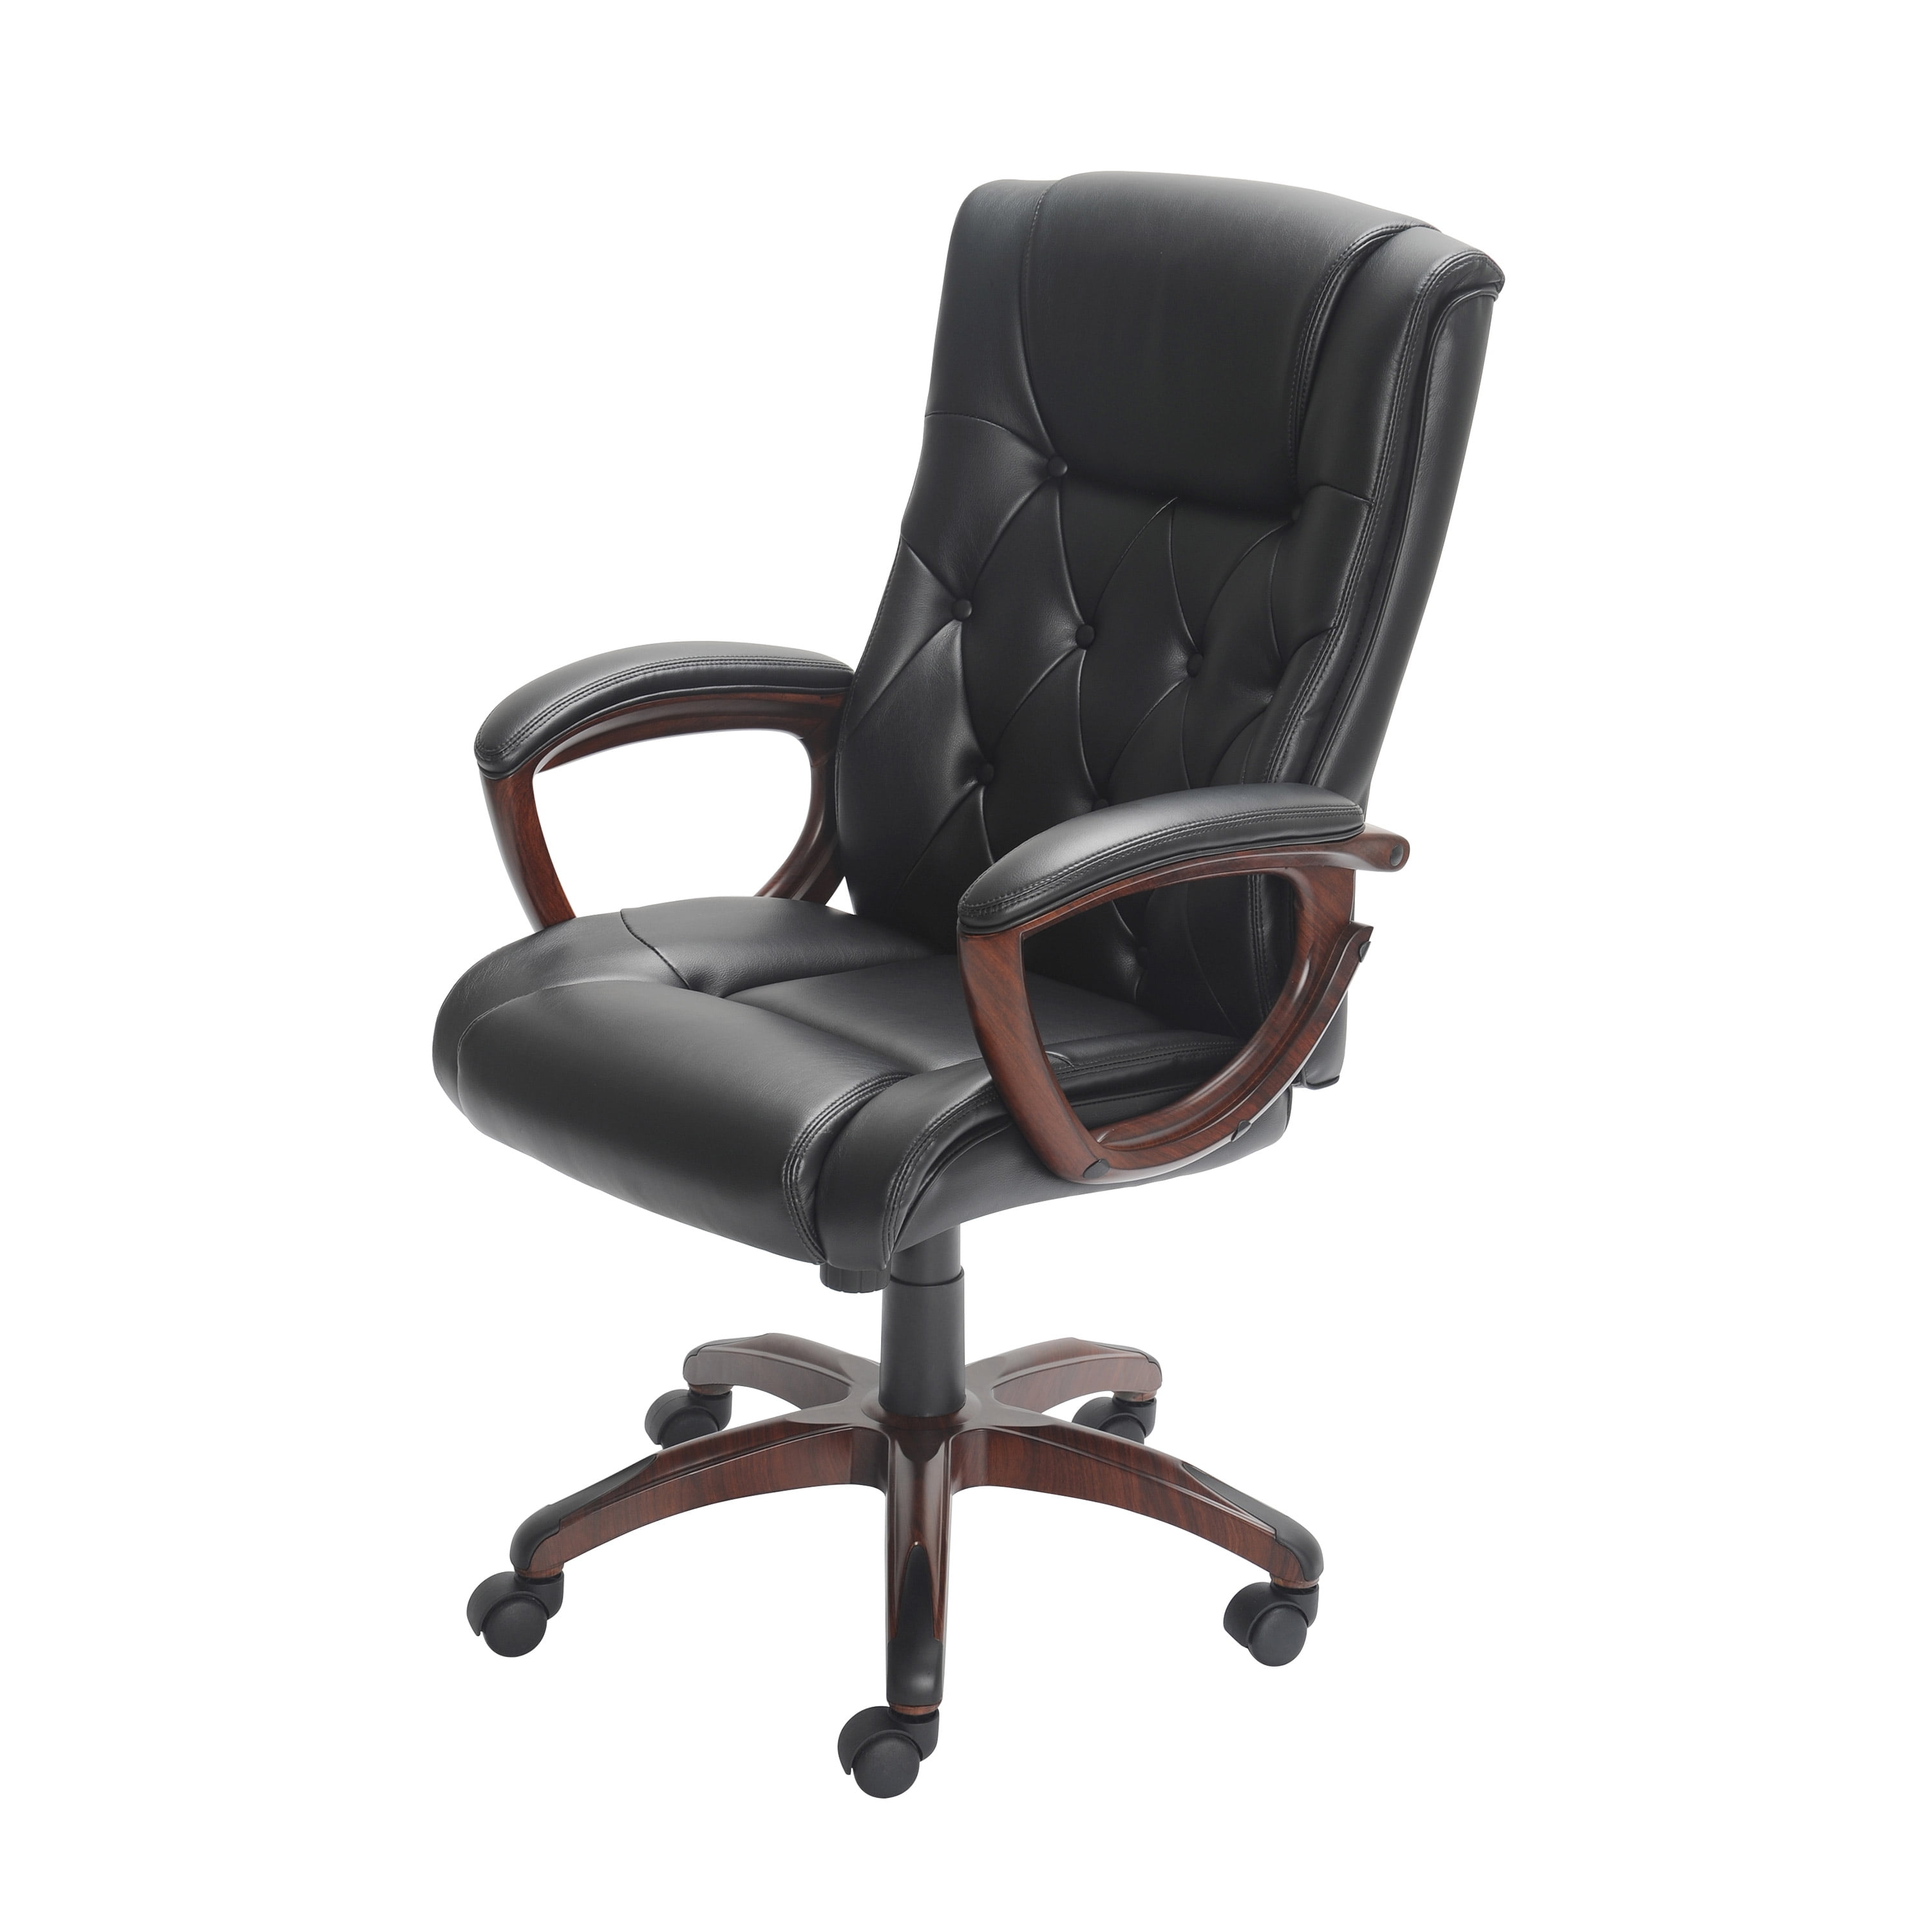 Better Homes and Gardens Bonded Leather Chair Black for sale online 